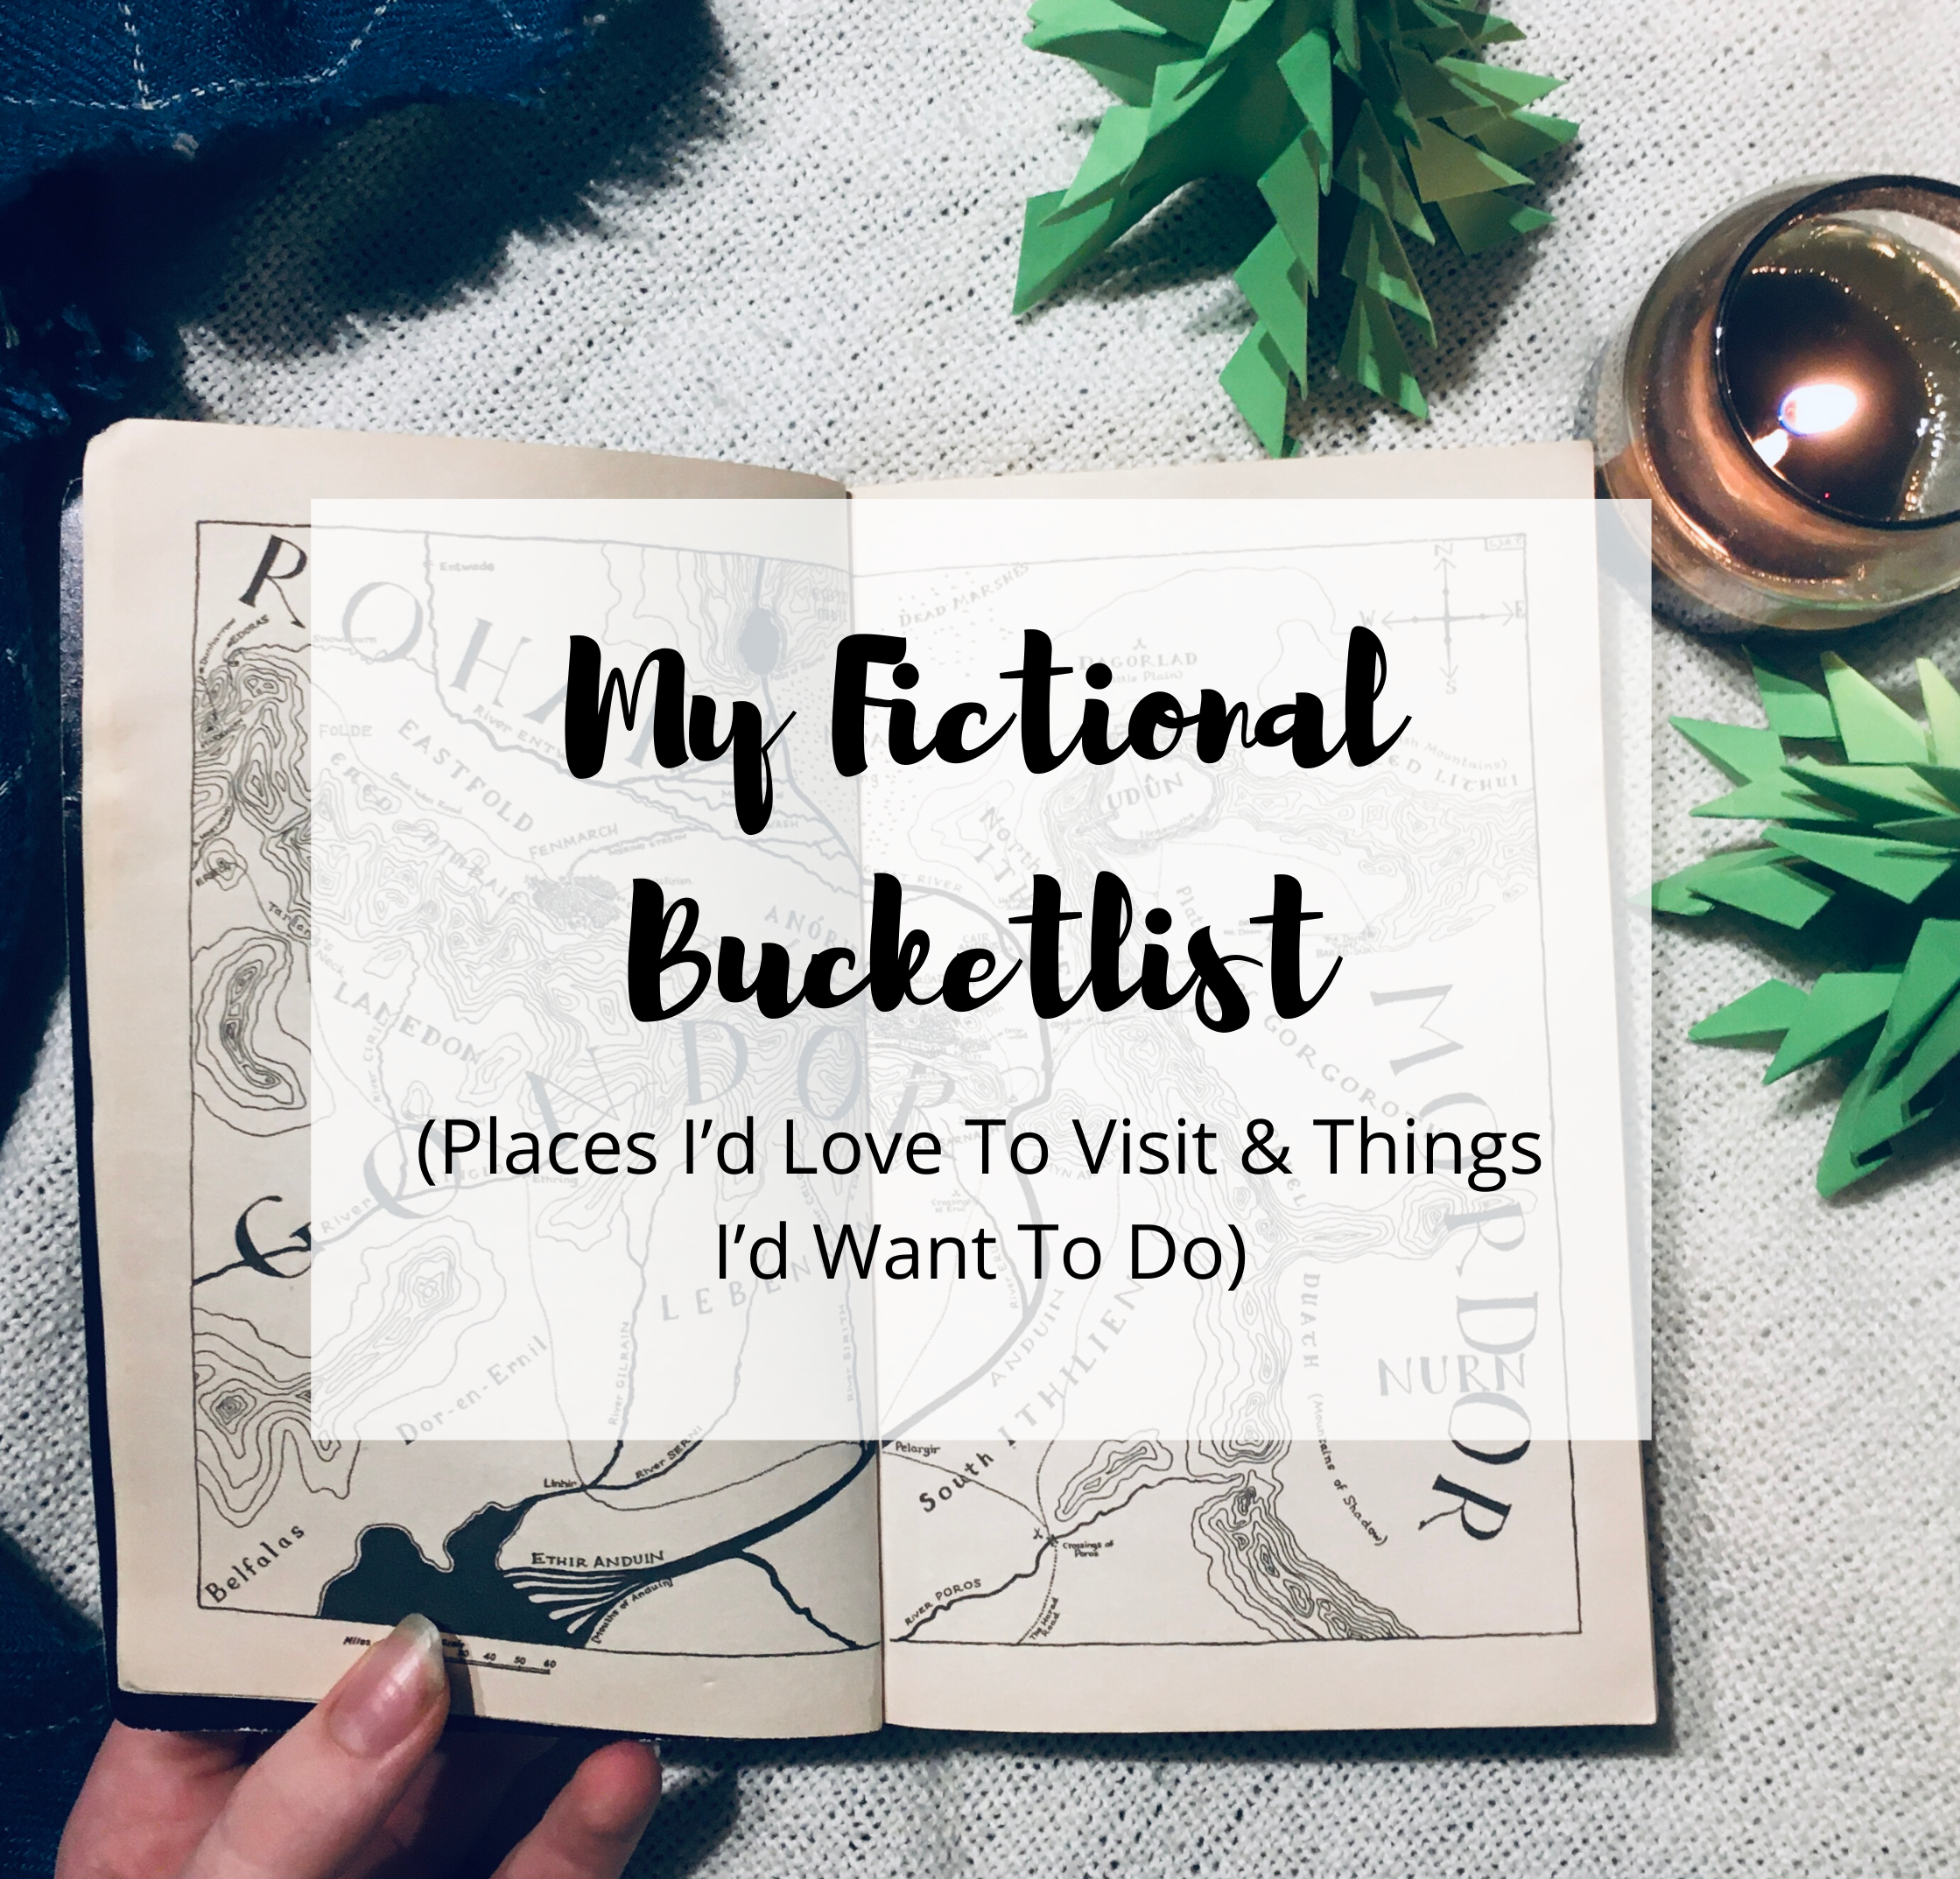 My Fictional Bucket List (Places I’d Love To Visit & Things I’d Want To Do)